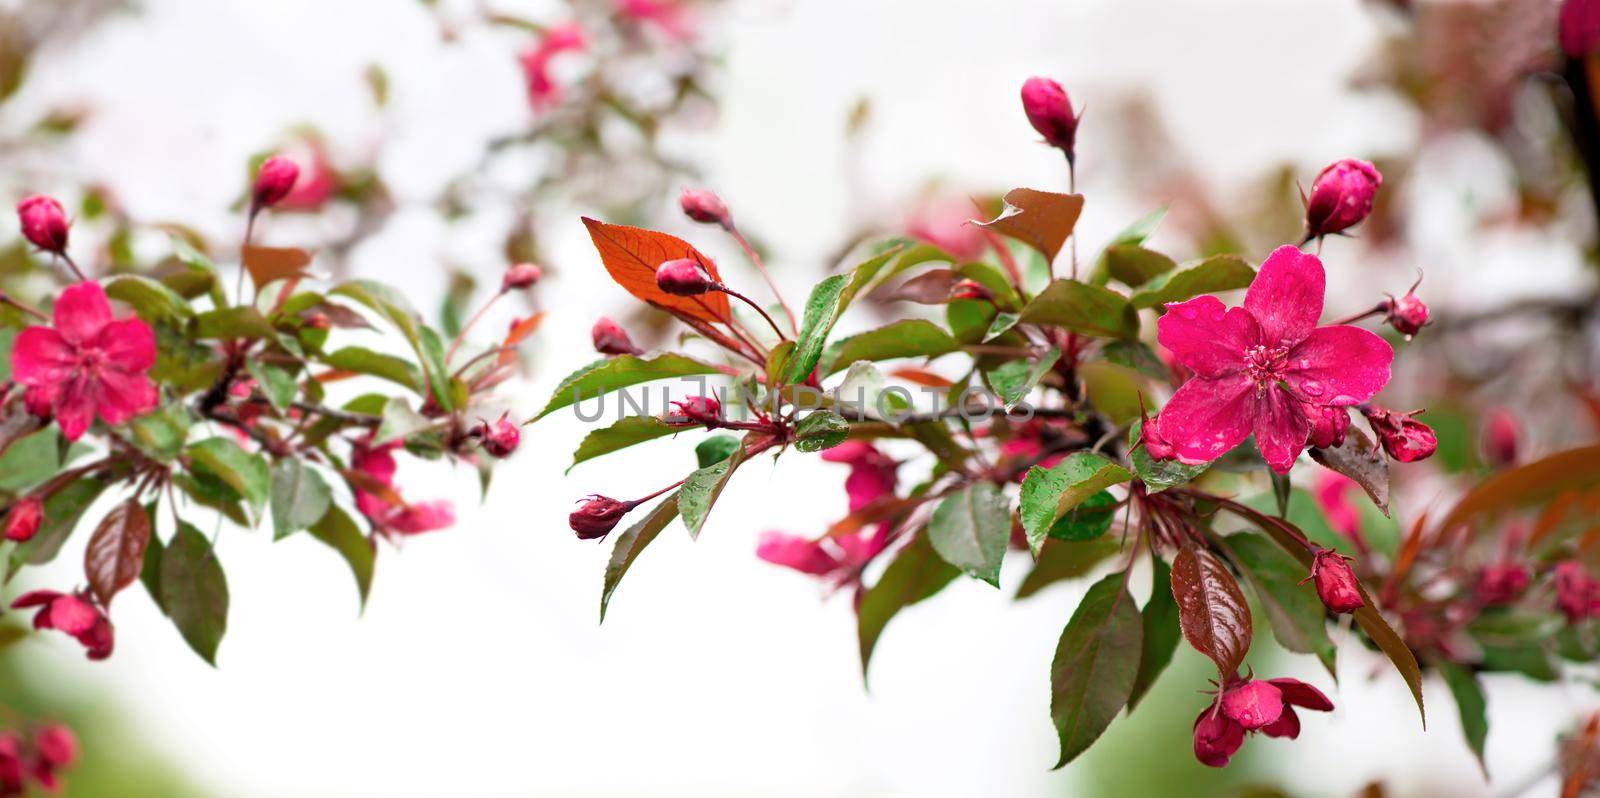 Blooming paradise apple tree buds. by aprilphoto